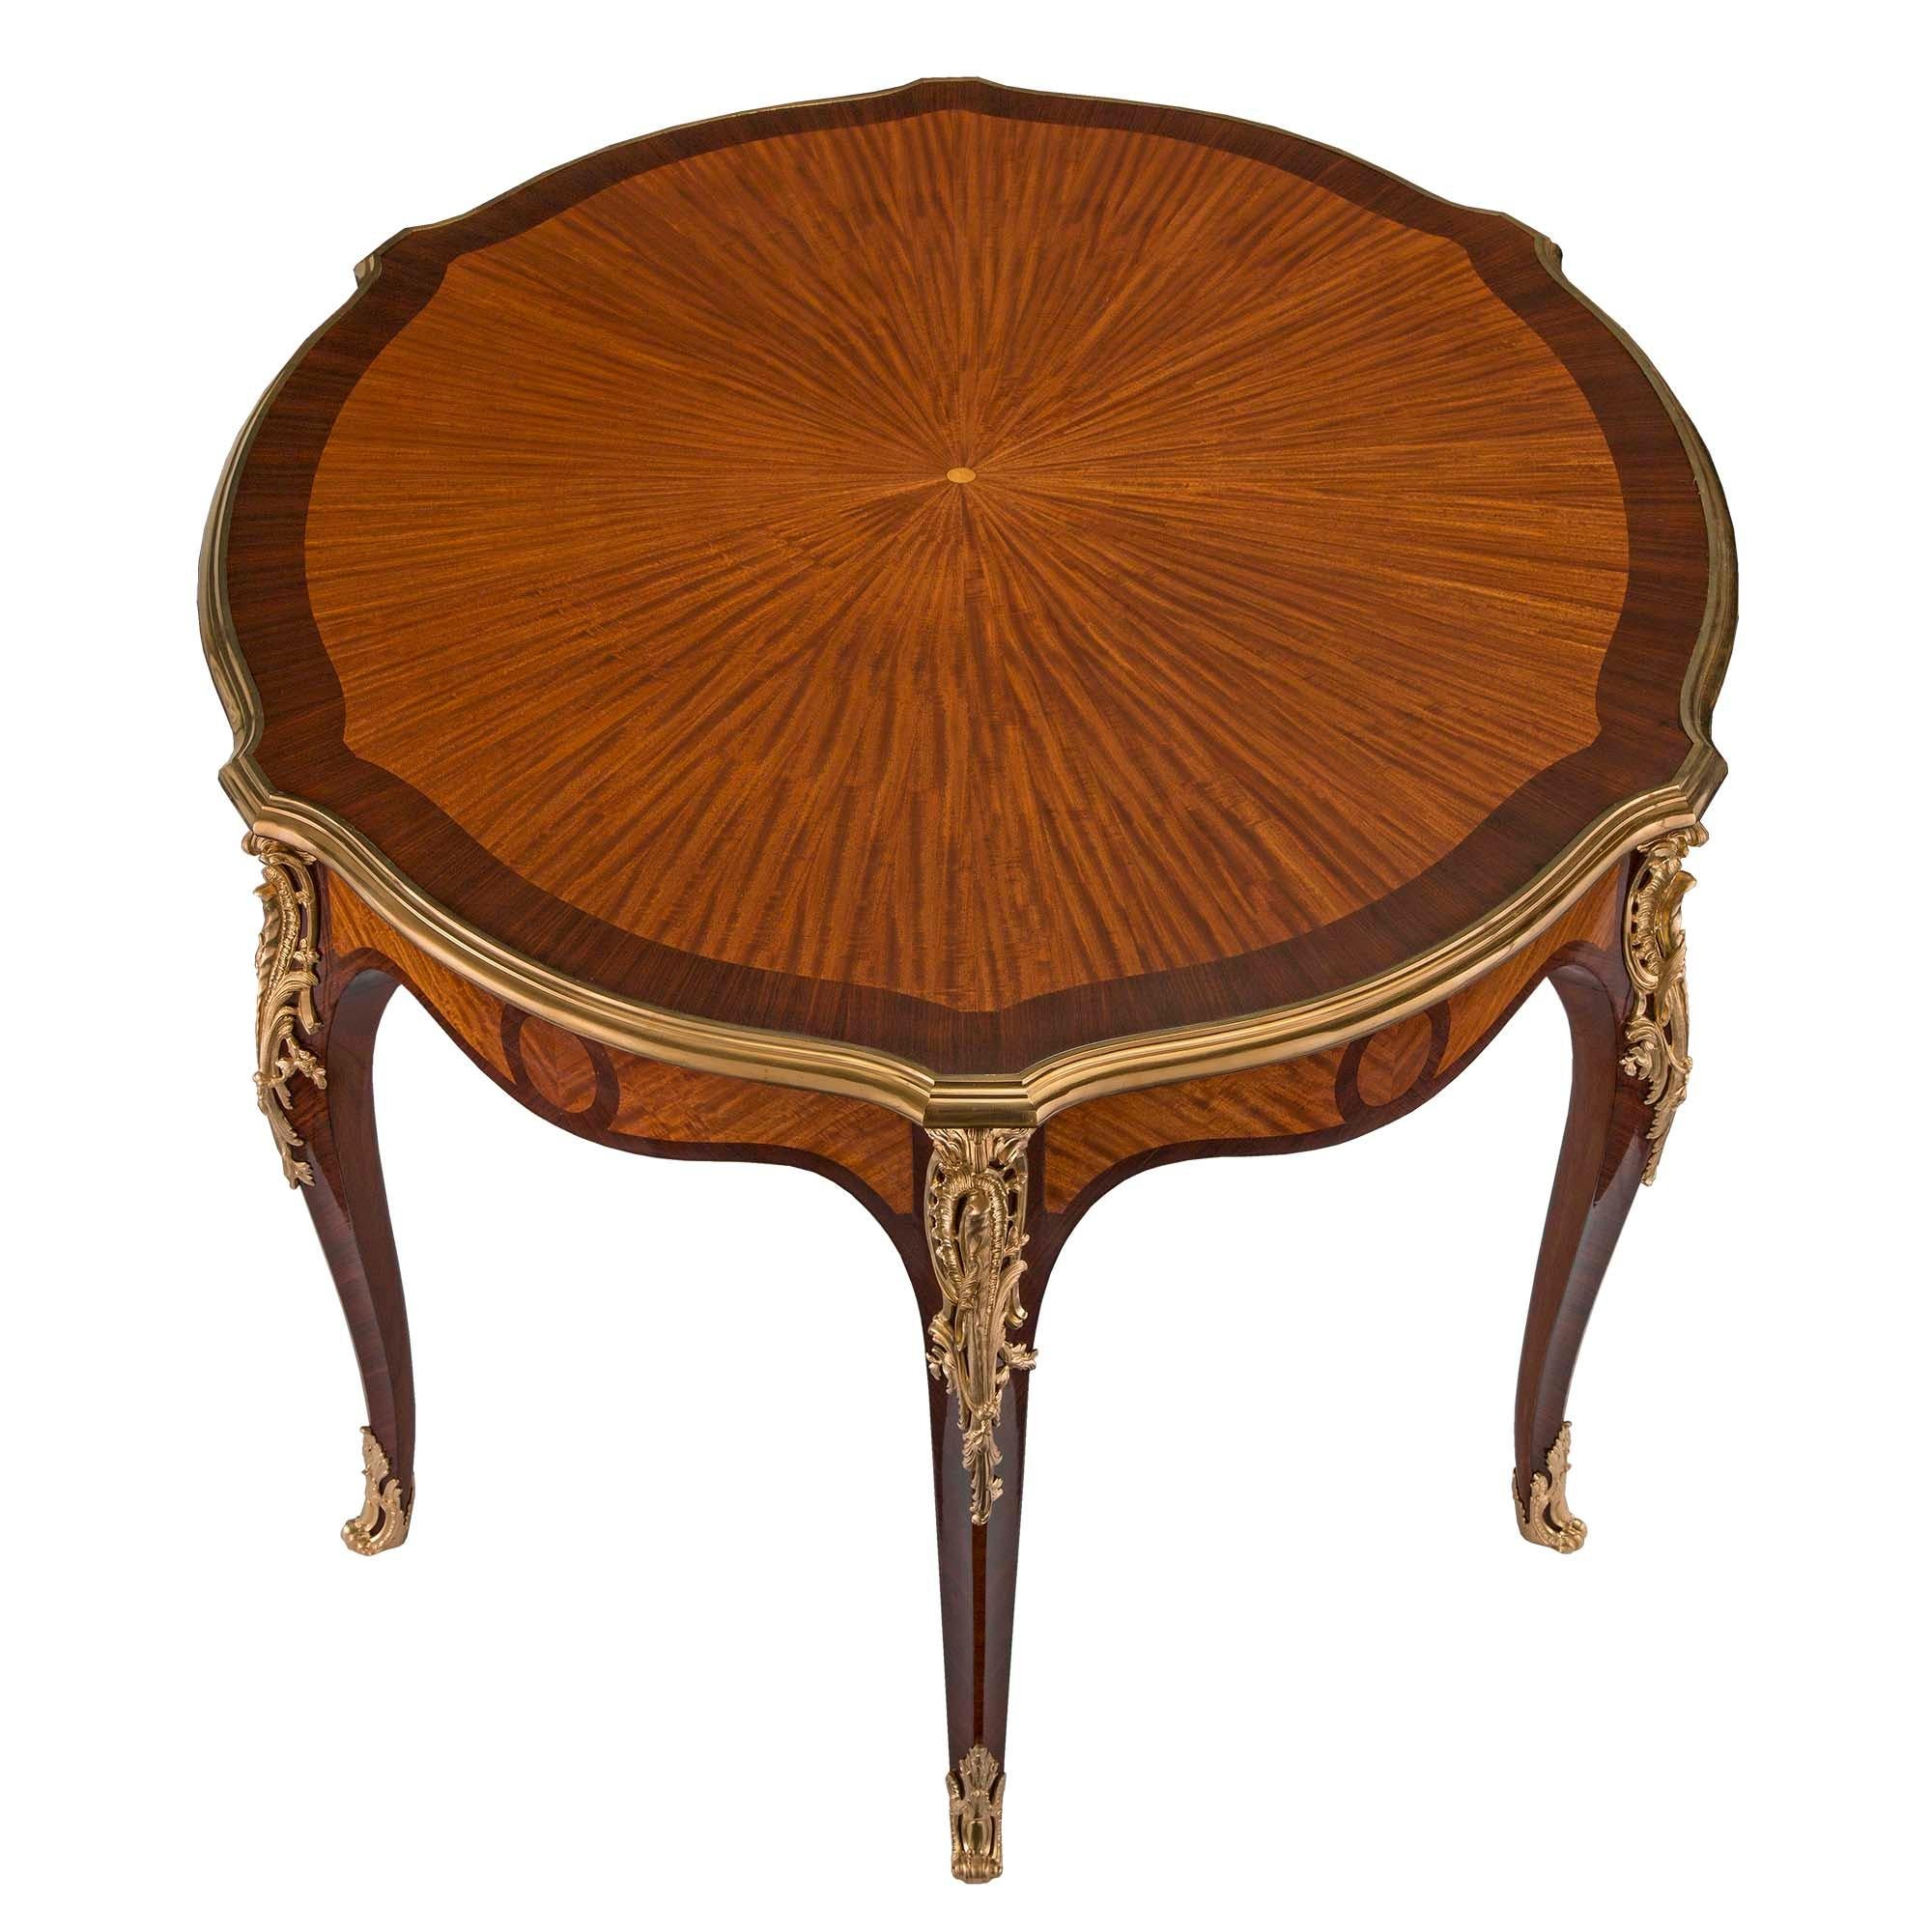 A stunning and rare French 19th century Louis XV st. kingwood, tulipwood and ormolu dining or center table. The table is raised by six elegant cabriole legs with richly chased pierced wrap around sabots and fine pierced ormolu foliate mounts. The